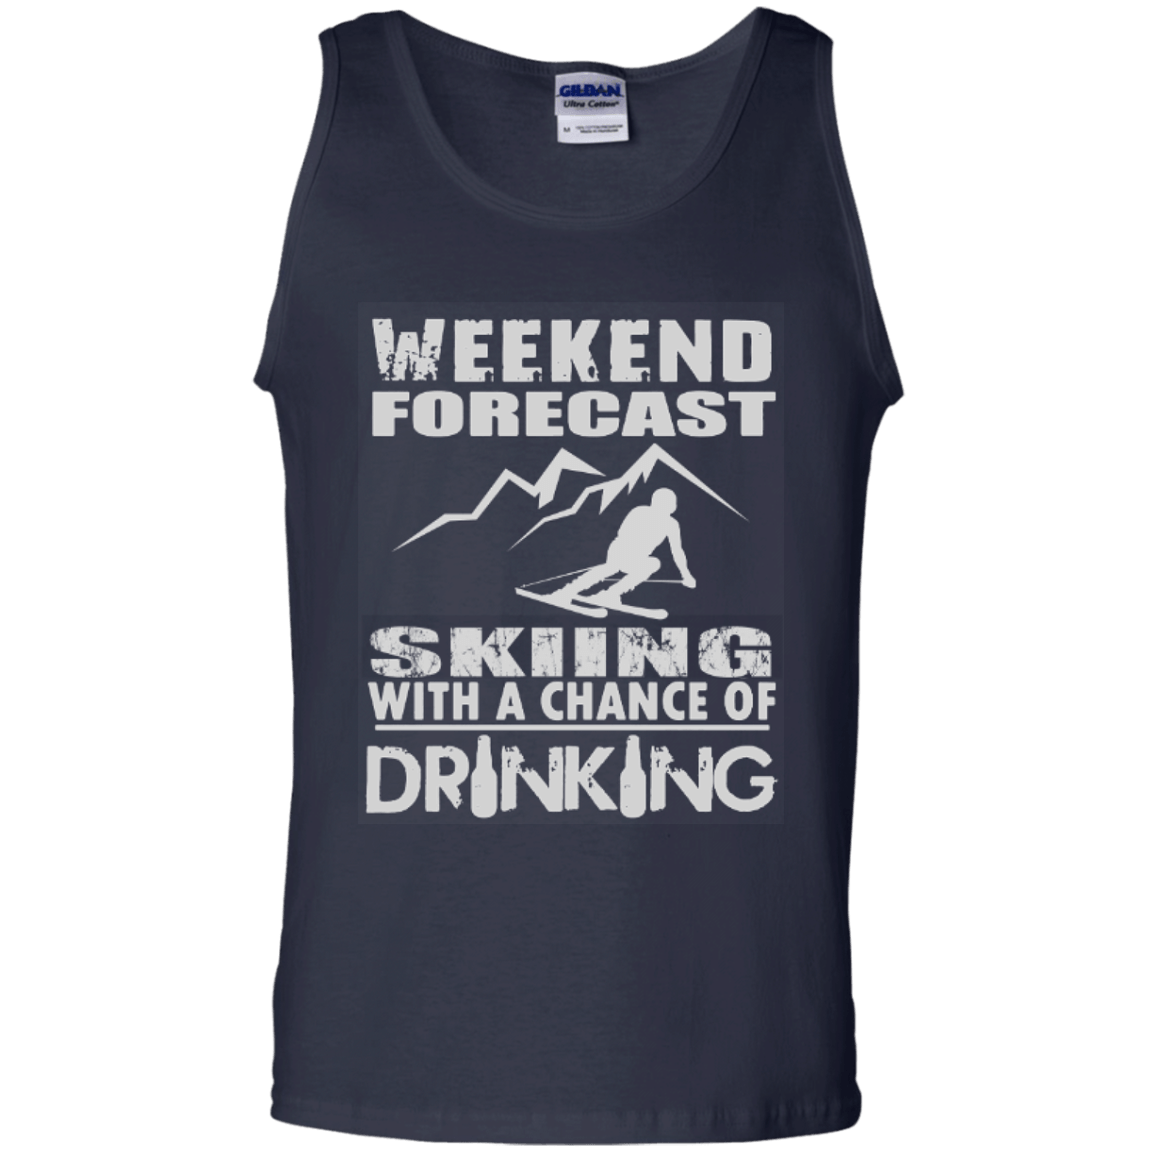 Weekend Forecast Skiing With A Chance of Drinking Tank Tops - Powderaddicts